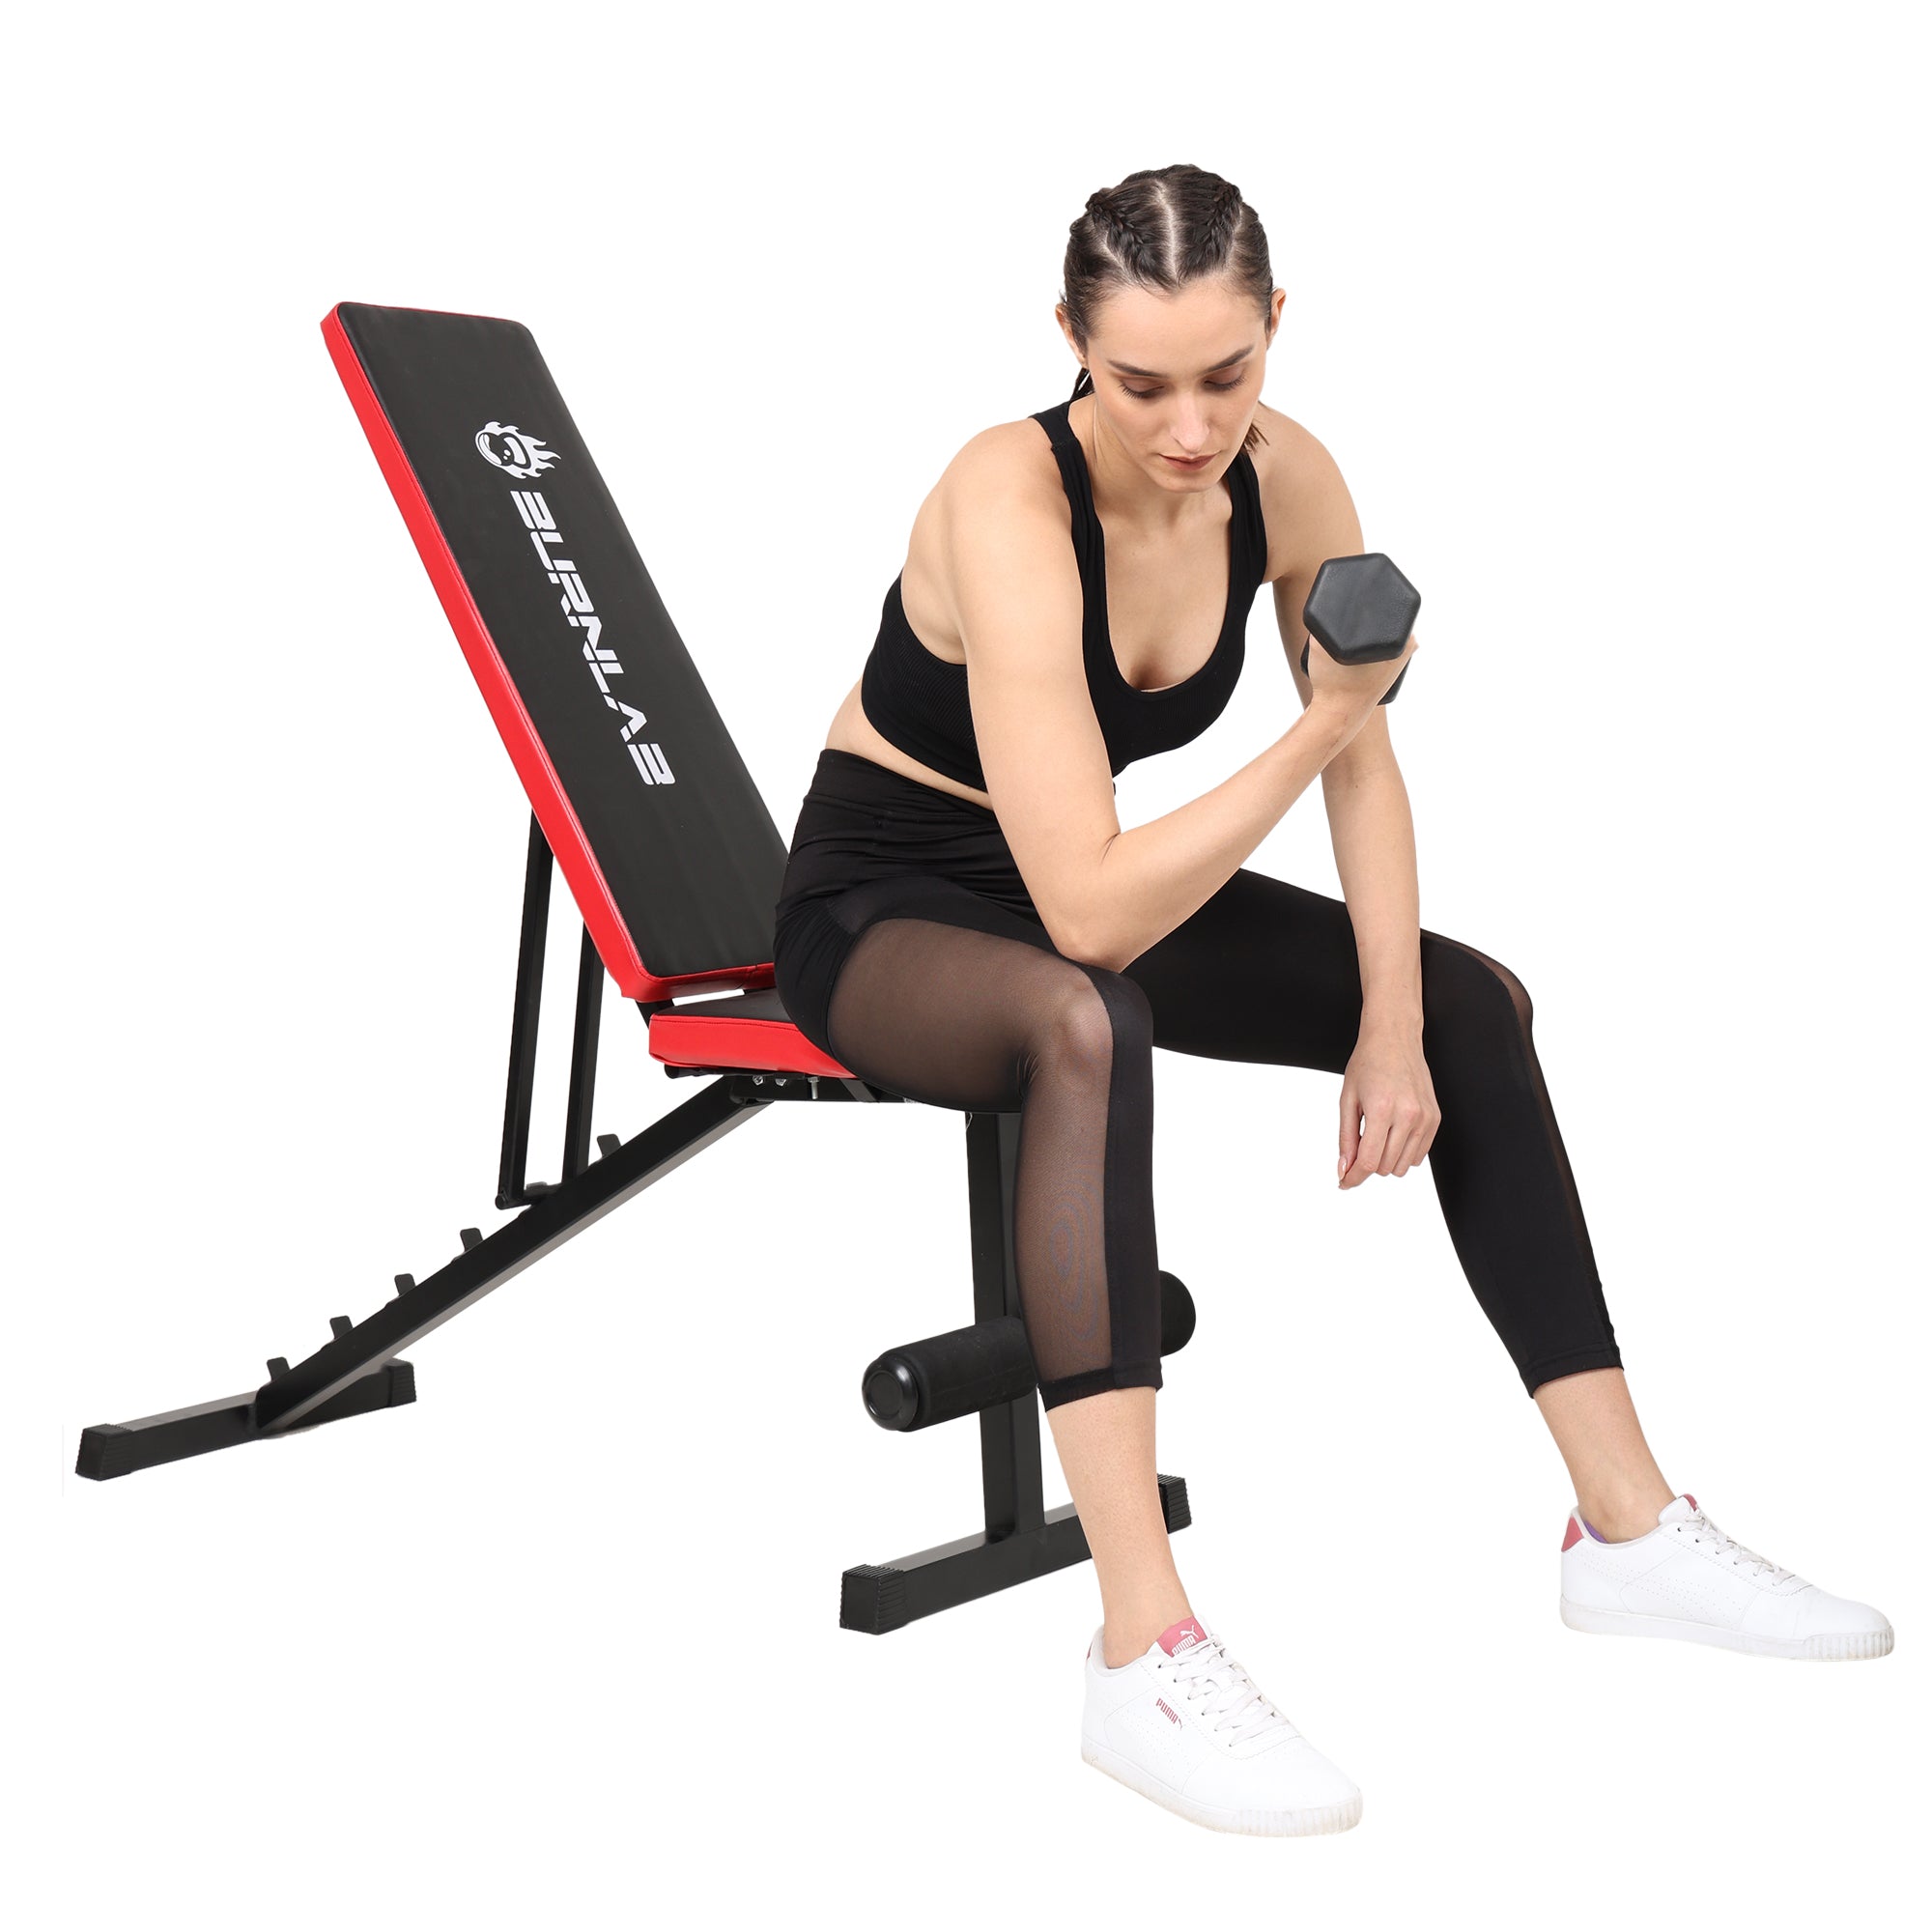 Heavy Duty Adjustable Incline Decline & Flat Workout Bench for Home, Gym, Strength Training, Abdominal and Full Body Workout